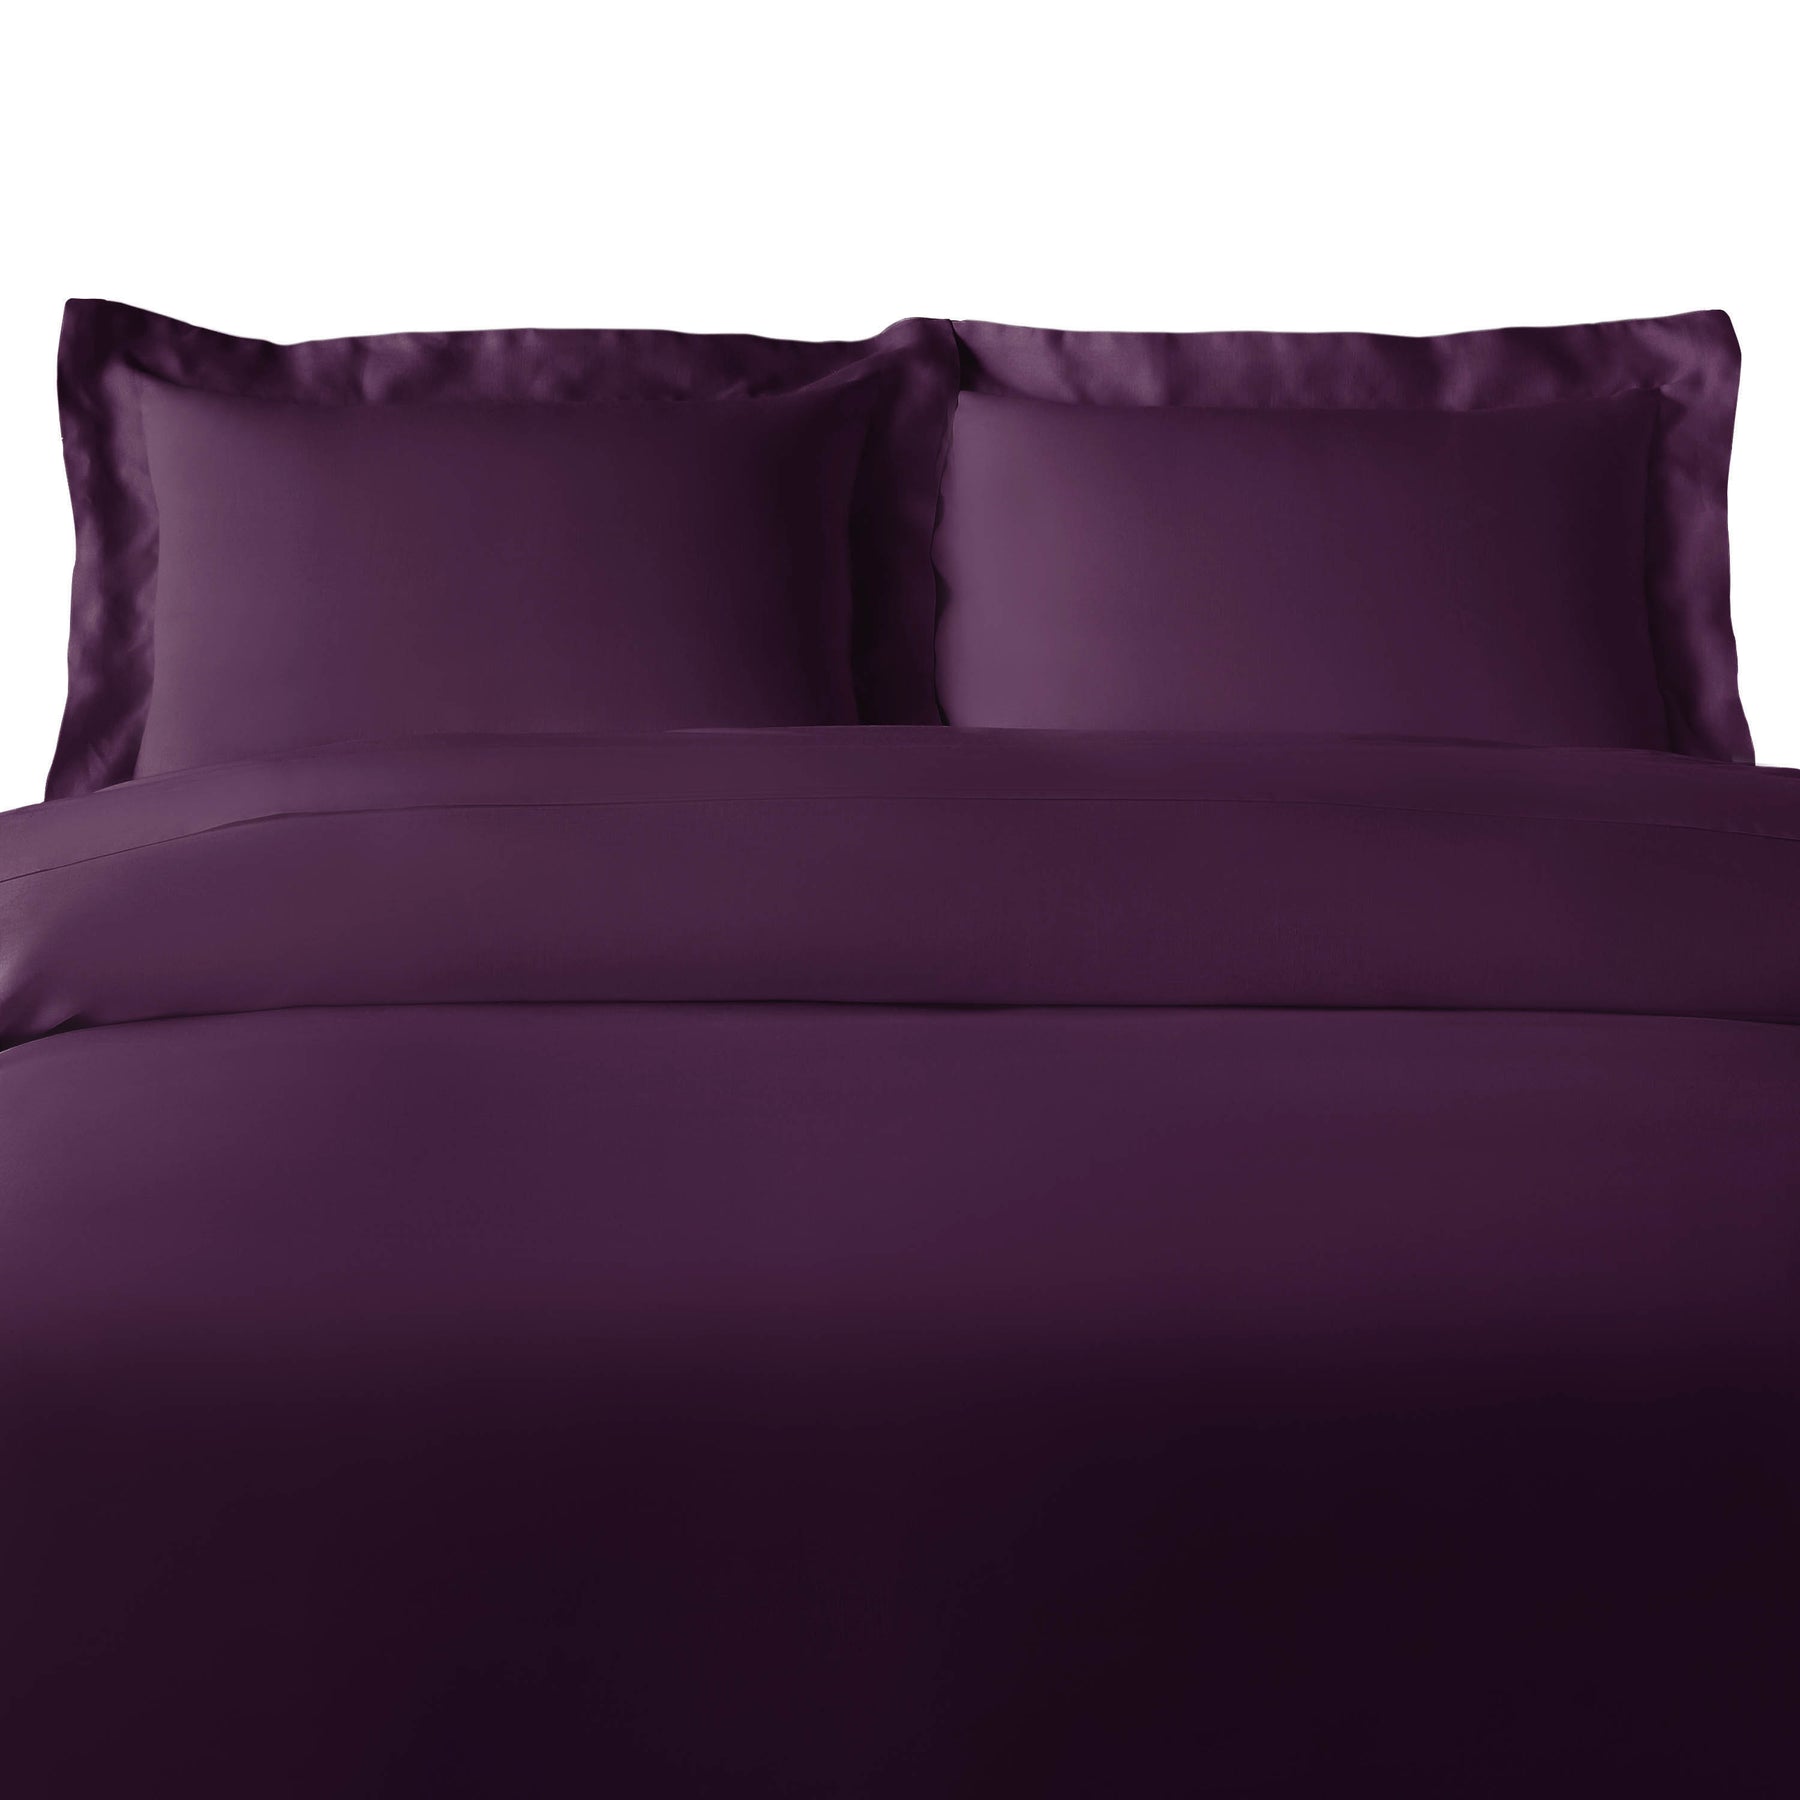 100% Rayon From Bamboo 300 Thread Count Solid Duvet Cover Set - Purple